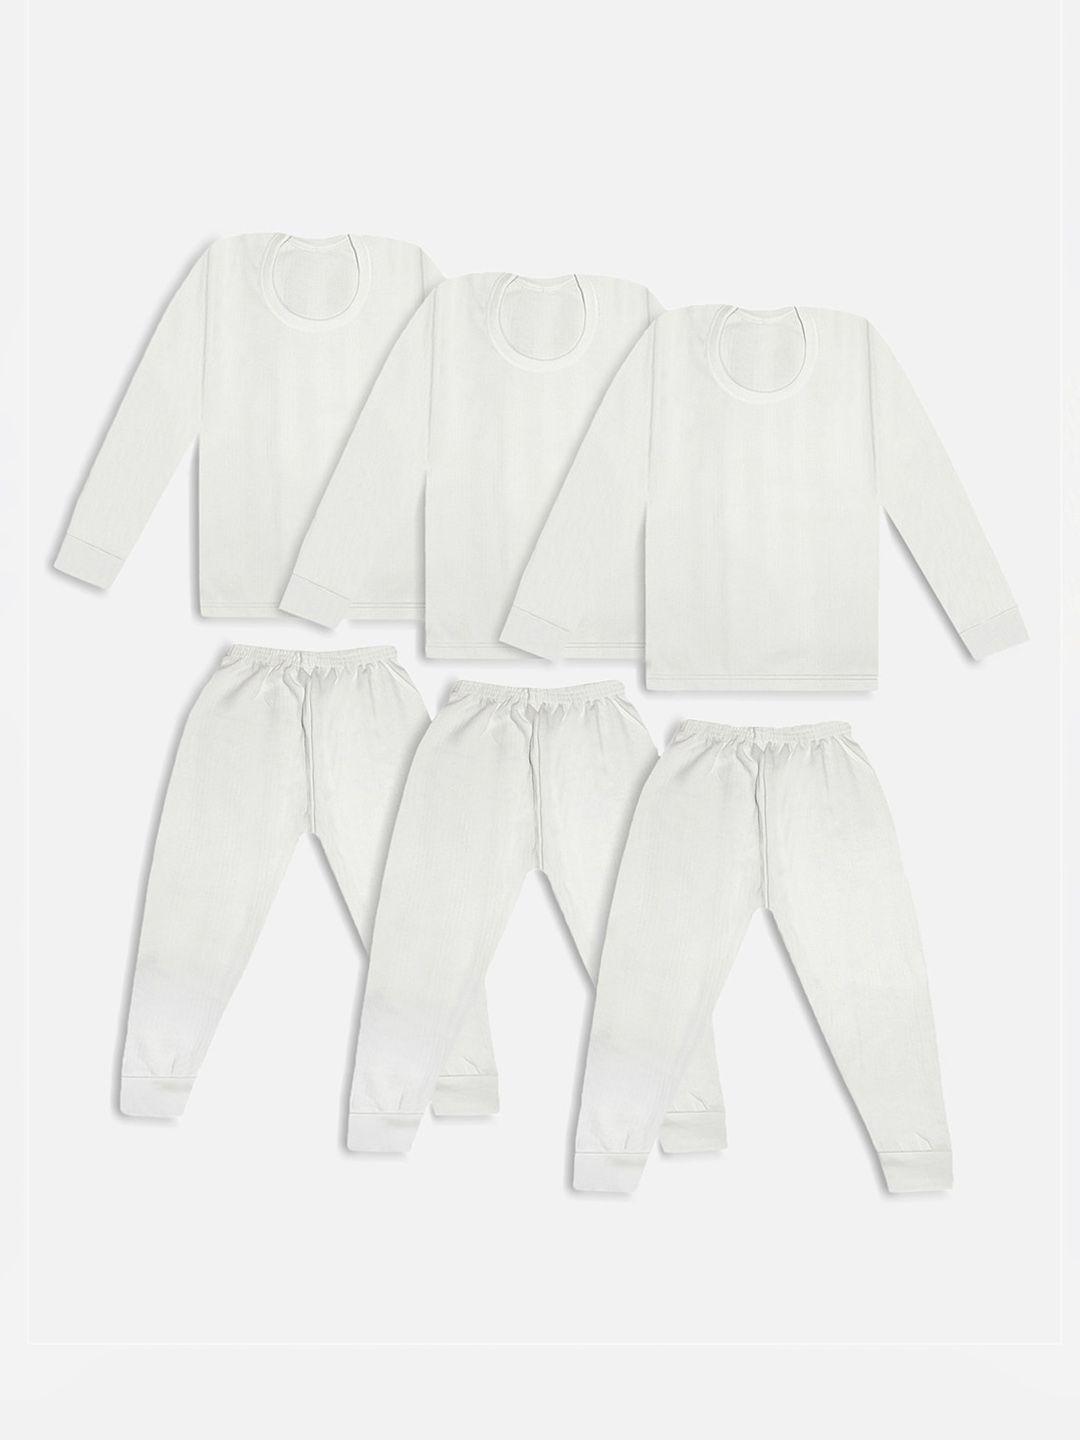 trampoline-kids-pack-of-3-white-striped-cotton-thermal-set